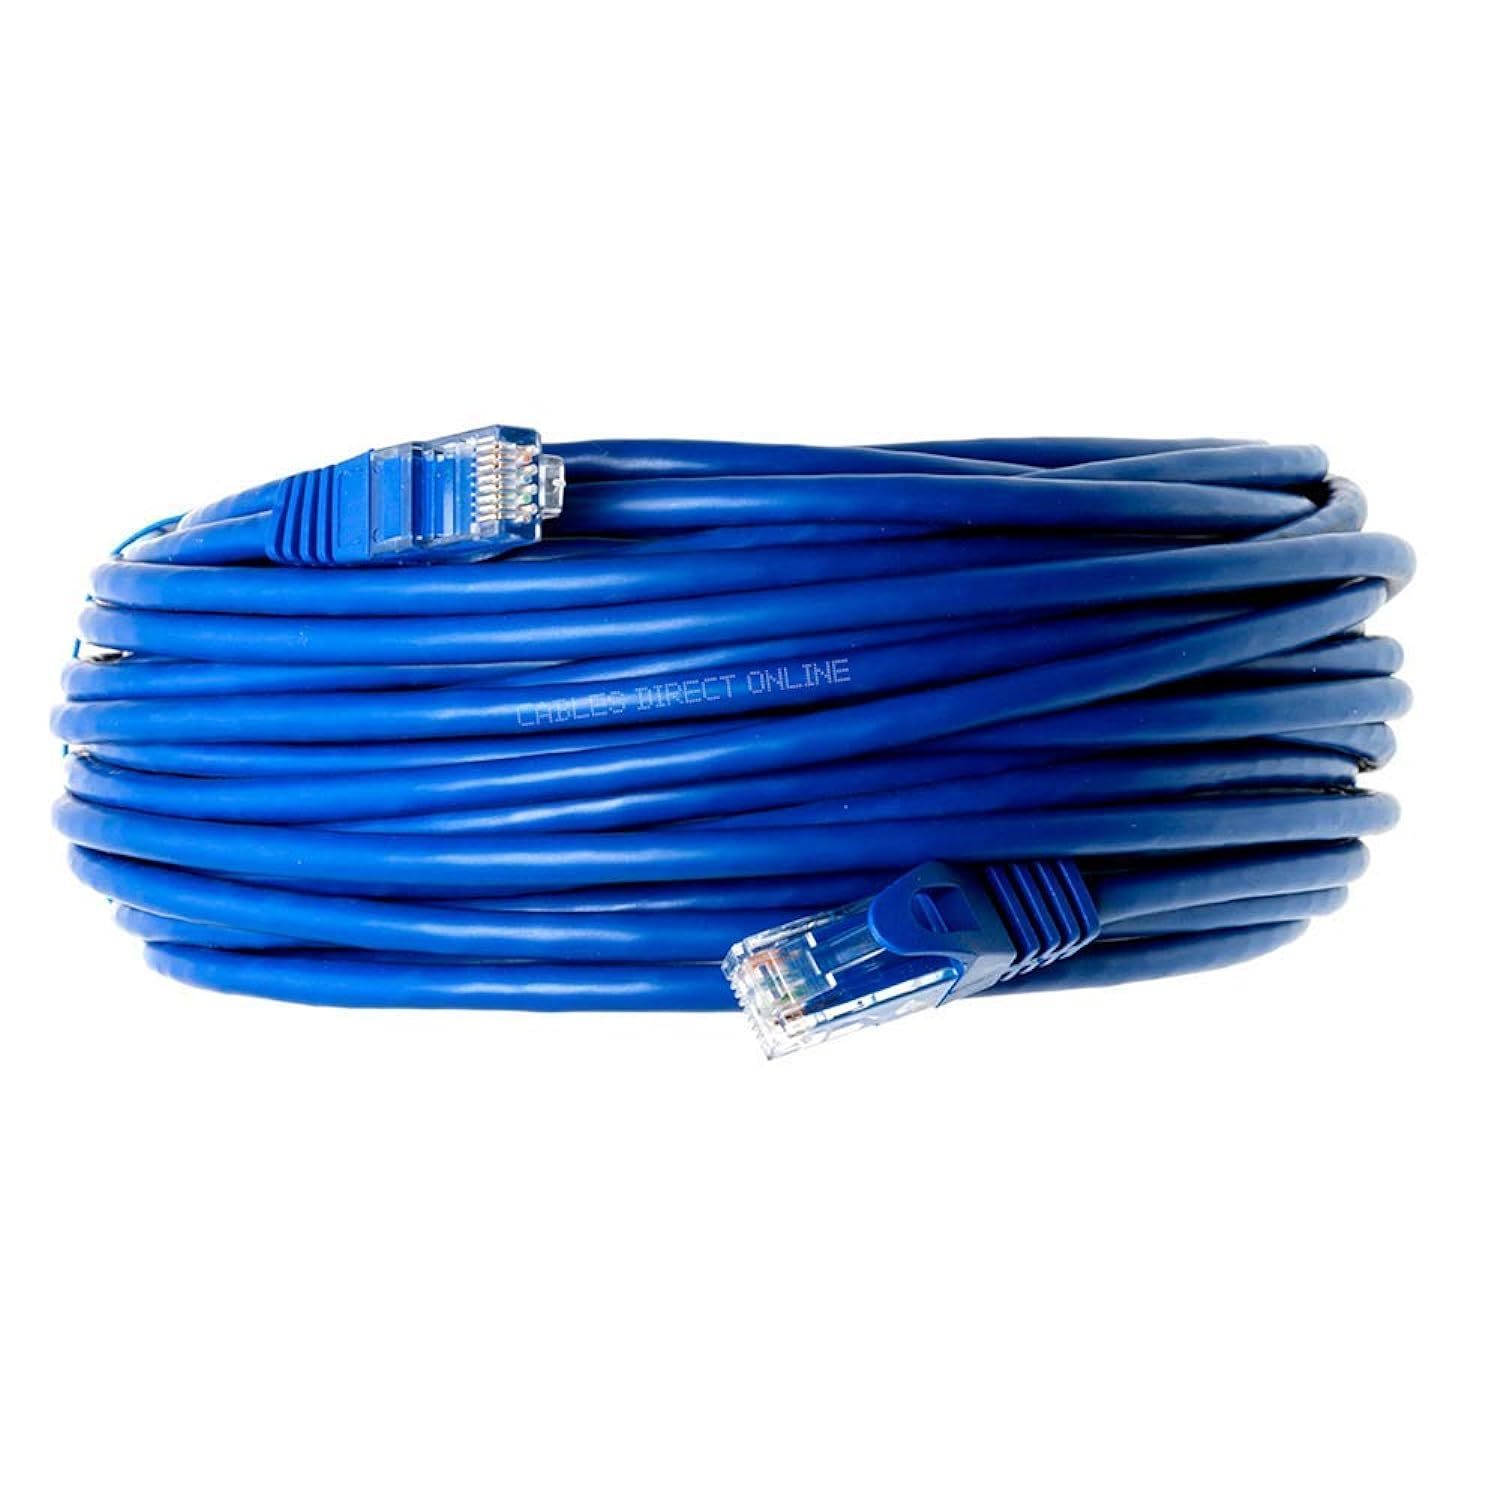 Primary image for Cables Direct Online Snagless Cat5e Ethernet Network Patch Cable Blue 100 Feet